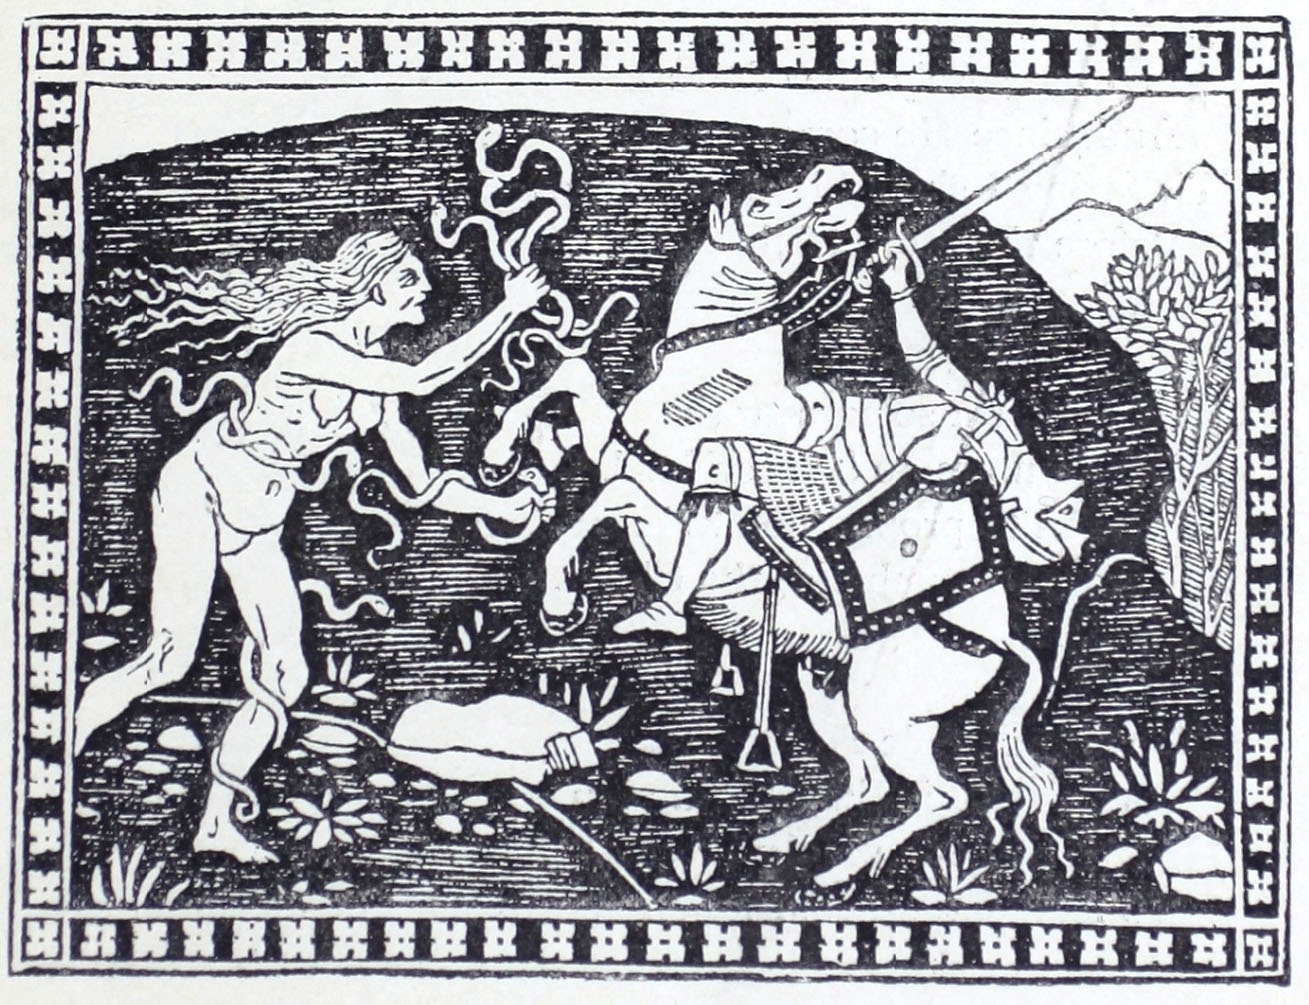 Wood engraved image shows a naked woman in right profile with long hair holding multiple snkes in her right hand and grabbing the foot of king's knight who is falling off the back of a horse. The scene takes place in an outdoor space with grass, rocks, and weeds. 